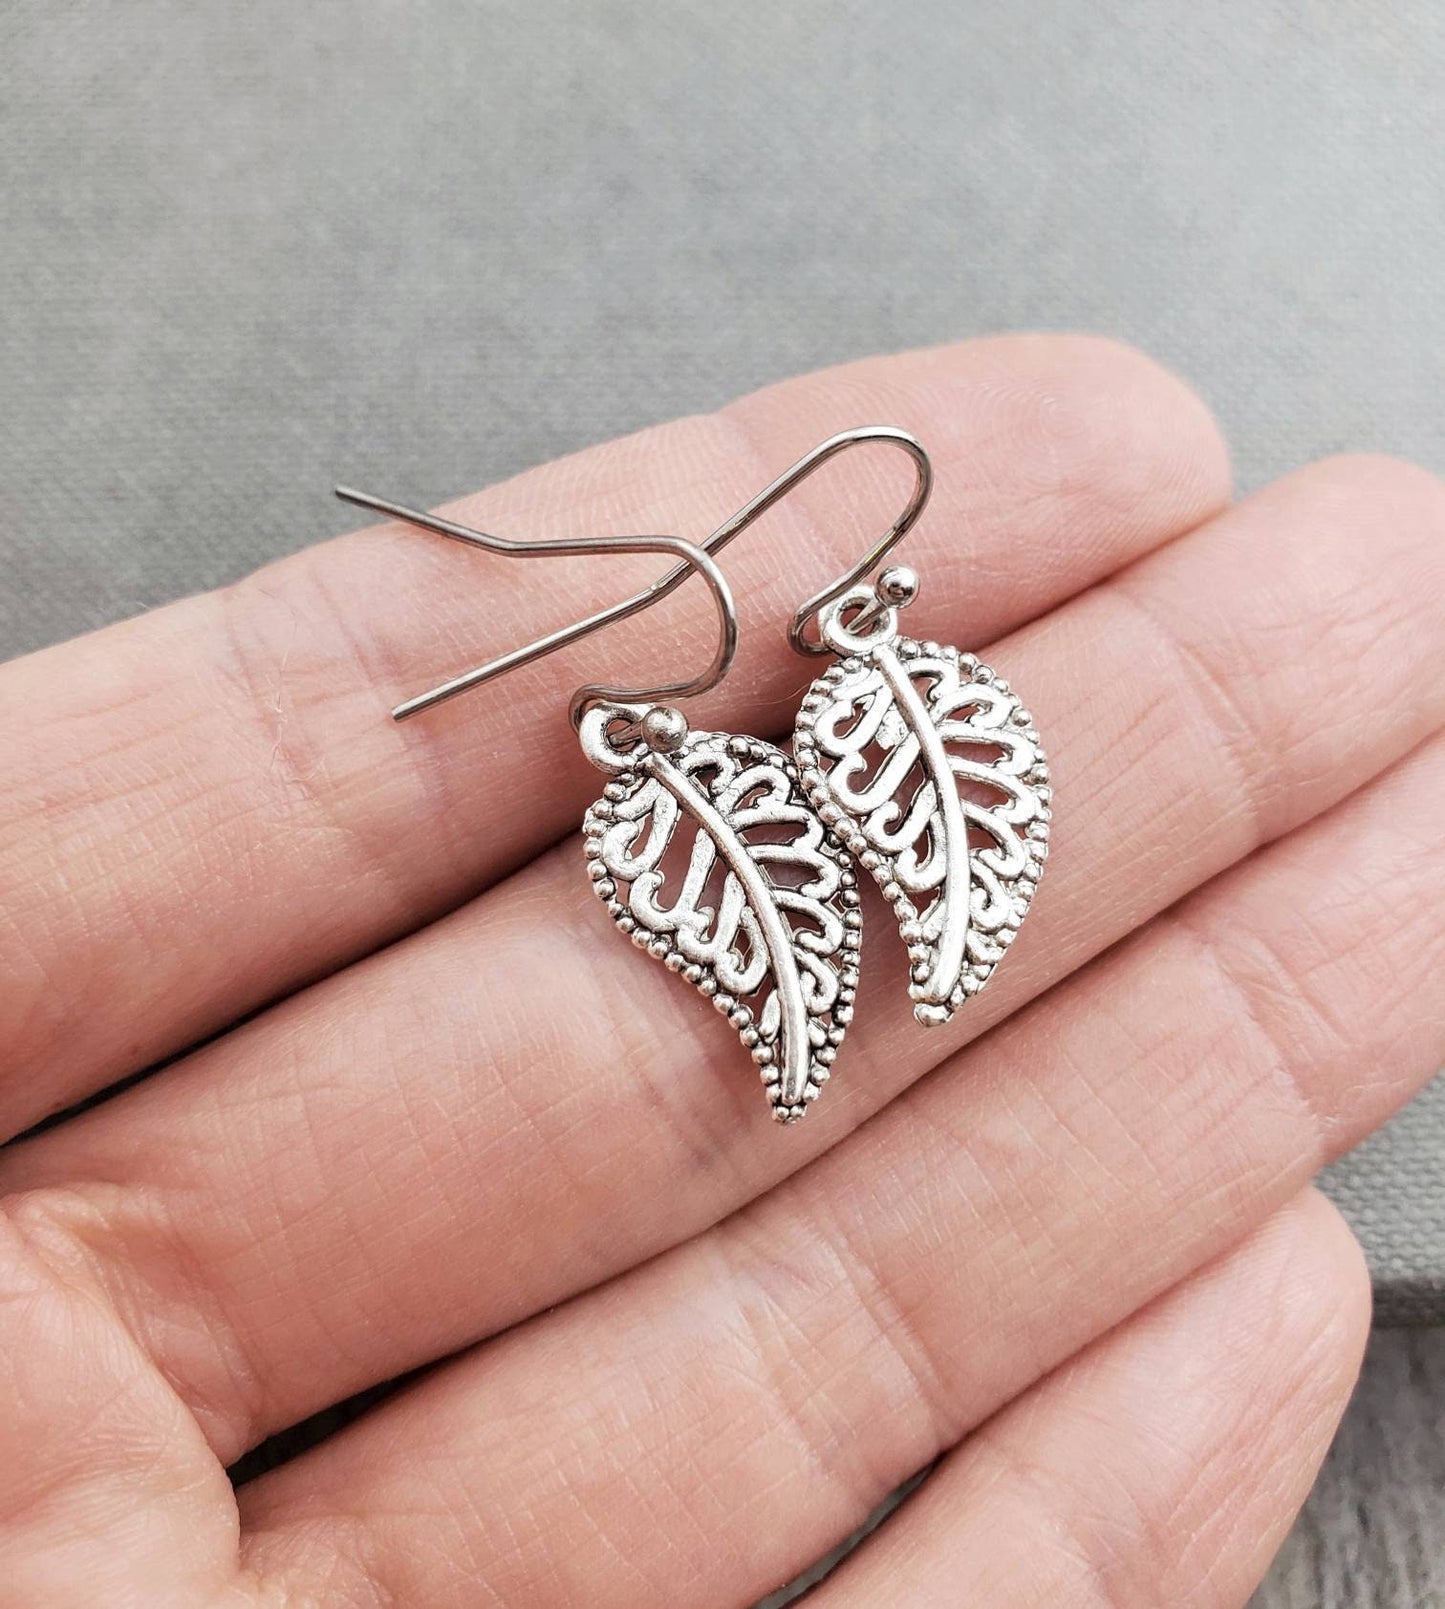 Silver Leaf Lightweight Earrings,  Everyday Charm Jewelry, Gift for Her